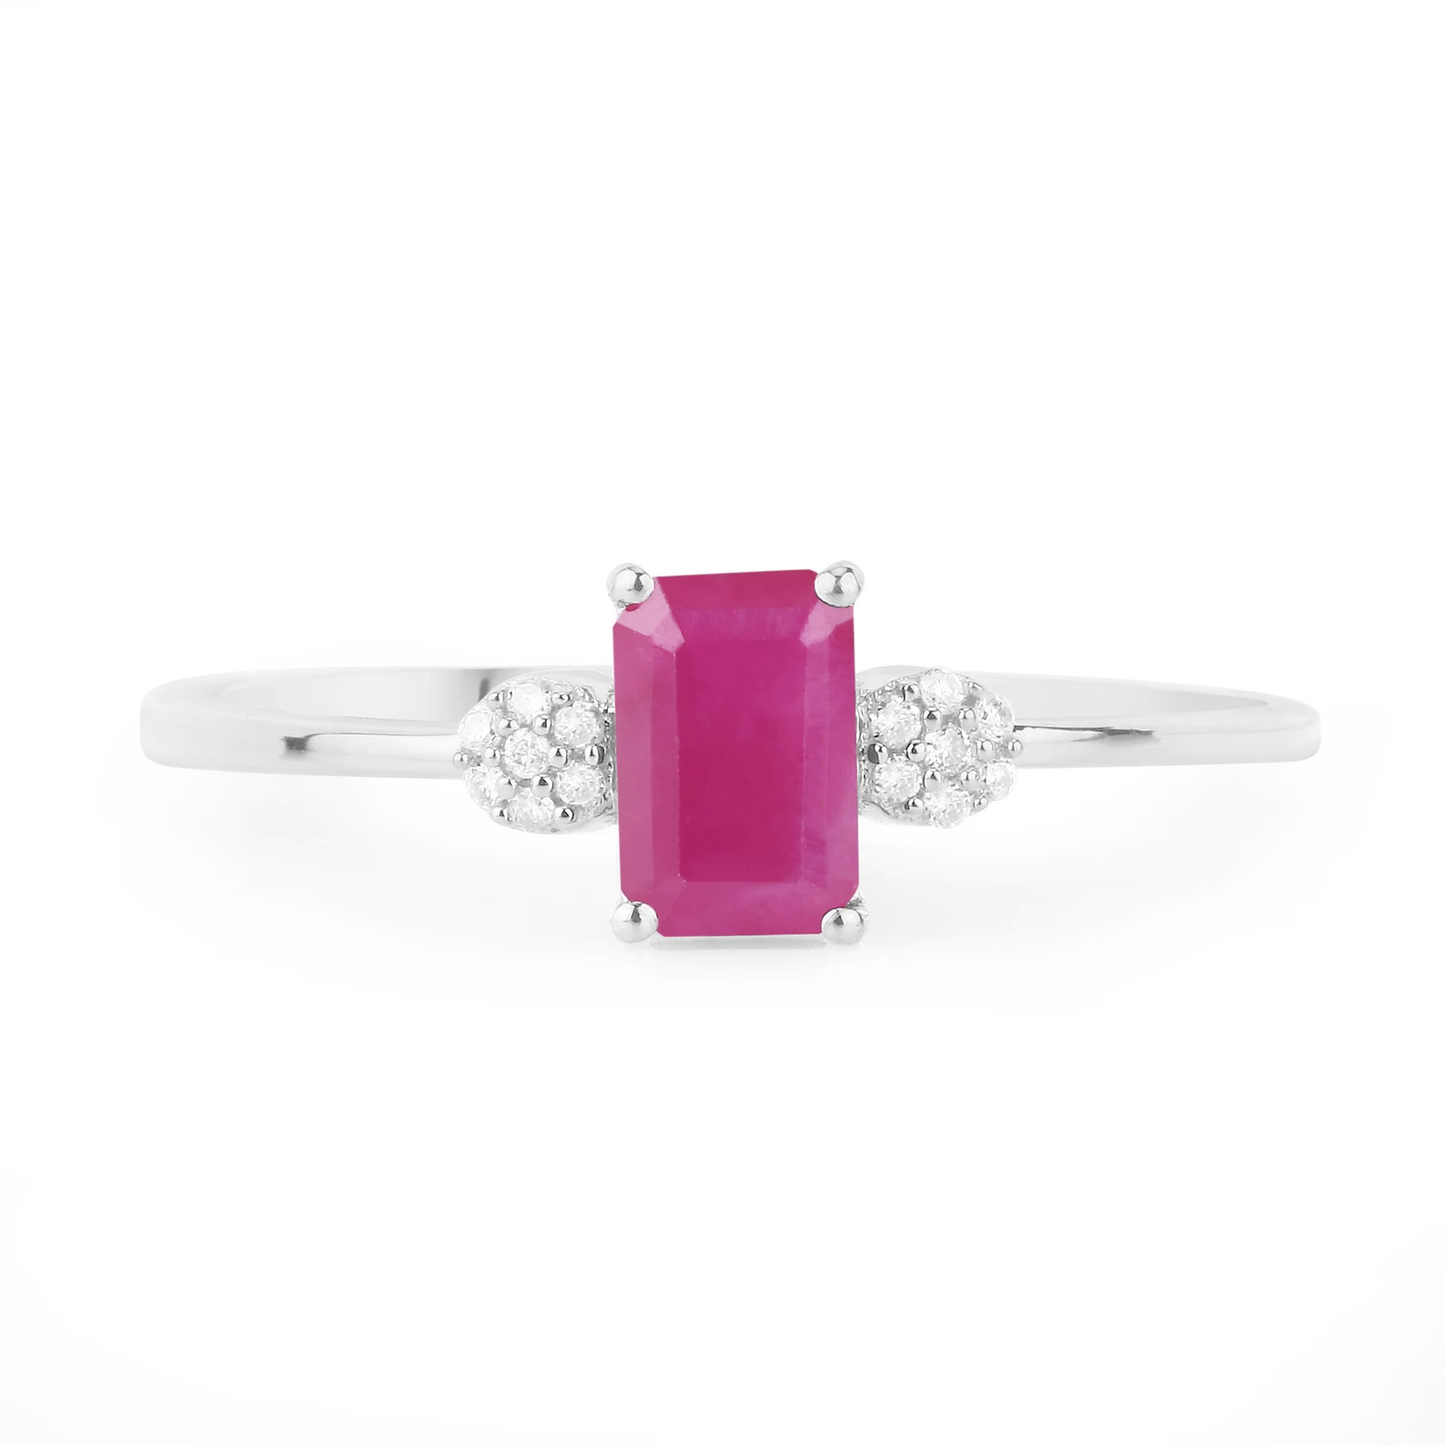 Octagon Ruby and 14 White Diamonds Cocktail Ring in 14K White Gold 